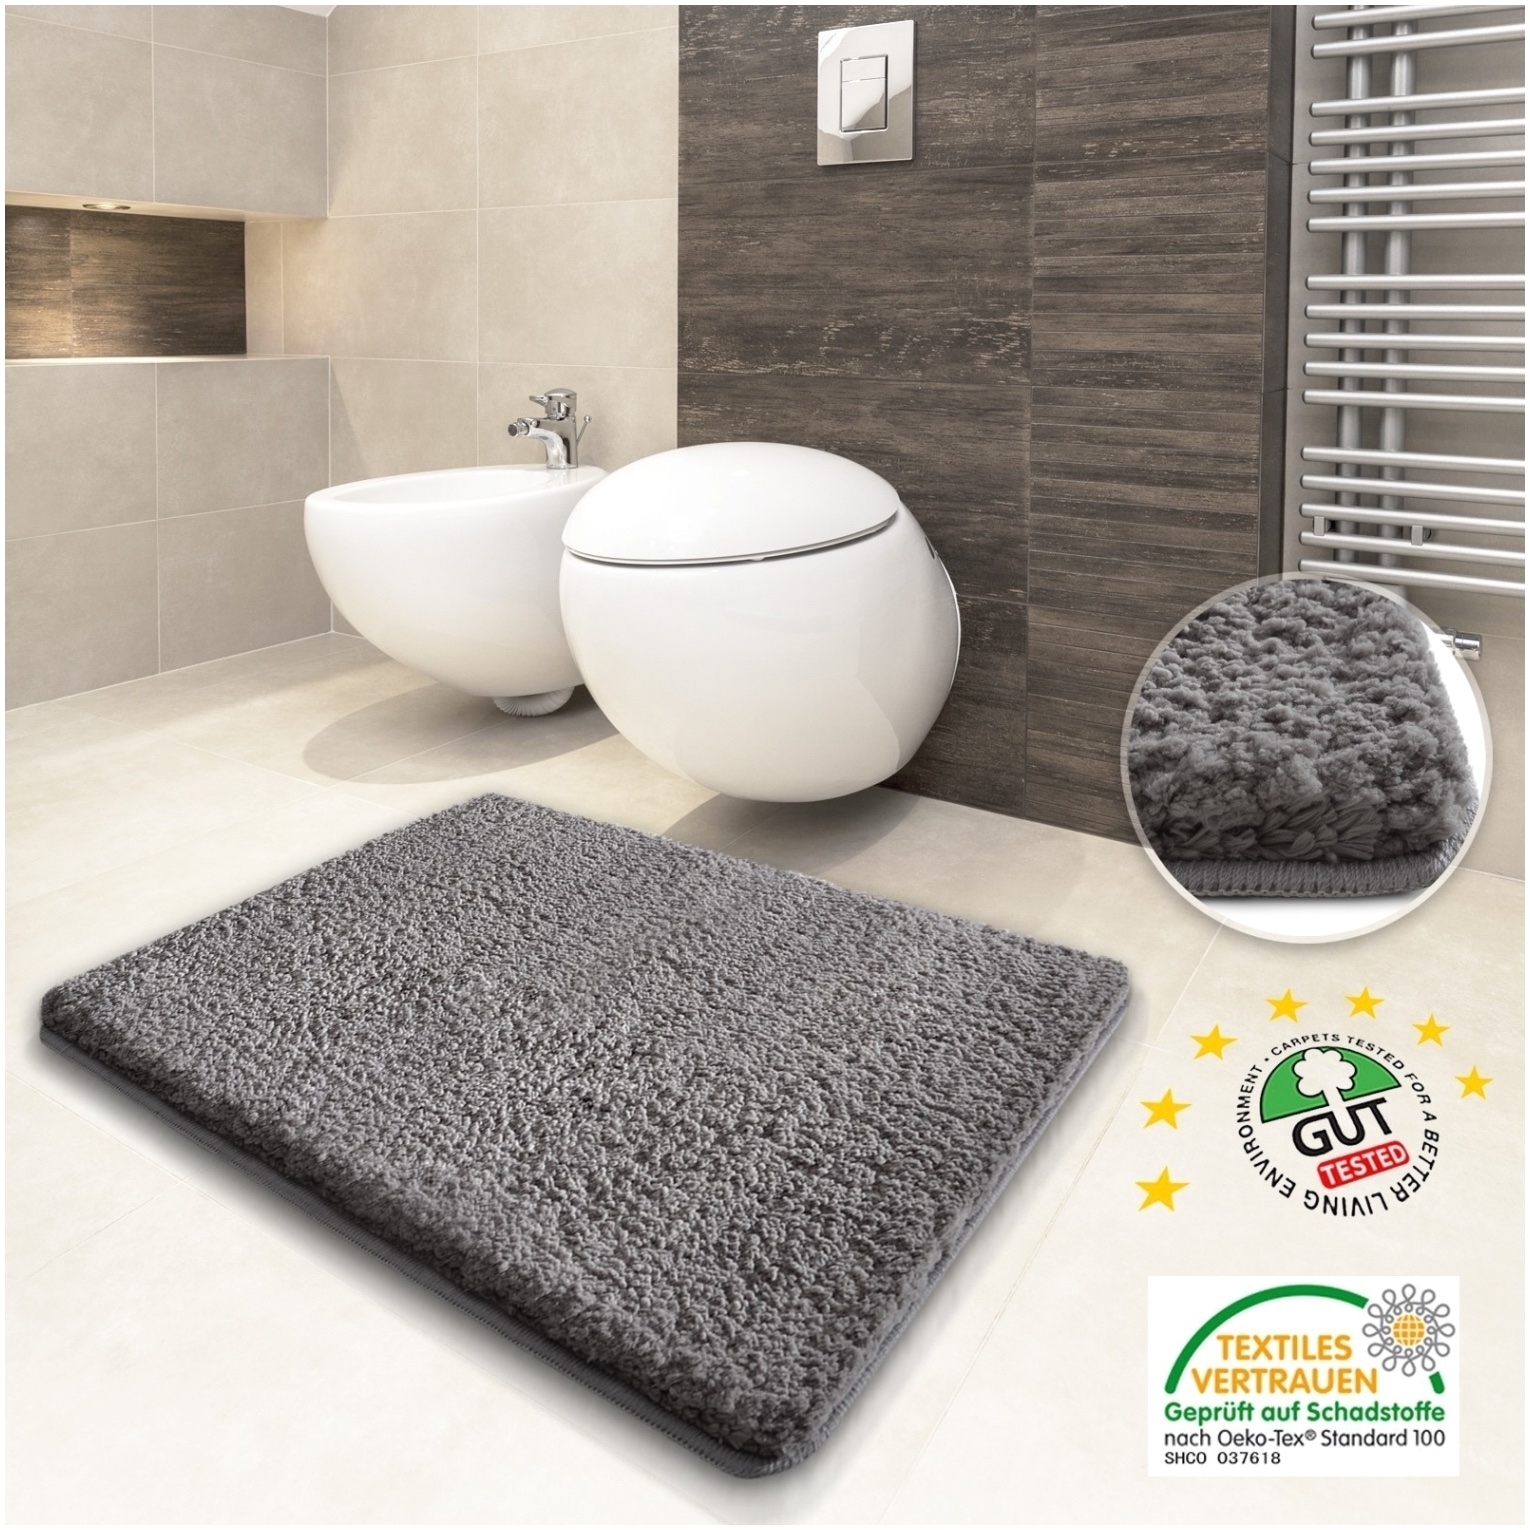 bathroom bed bath and beyond jcpenney bath rugs jc penney shower